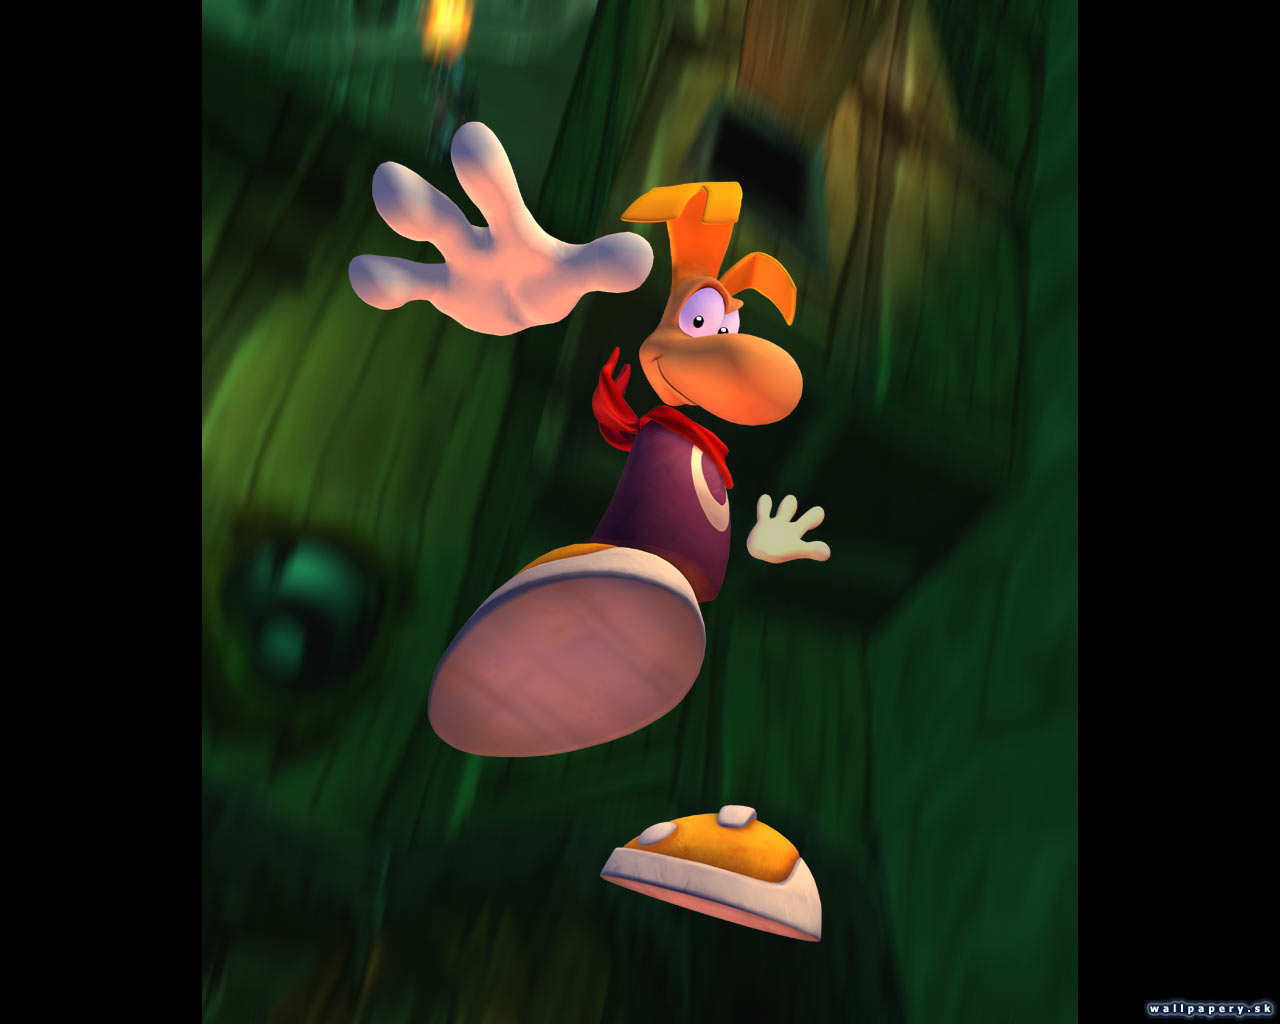 Rayman 2: The Great Escape - wallpaper 8